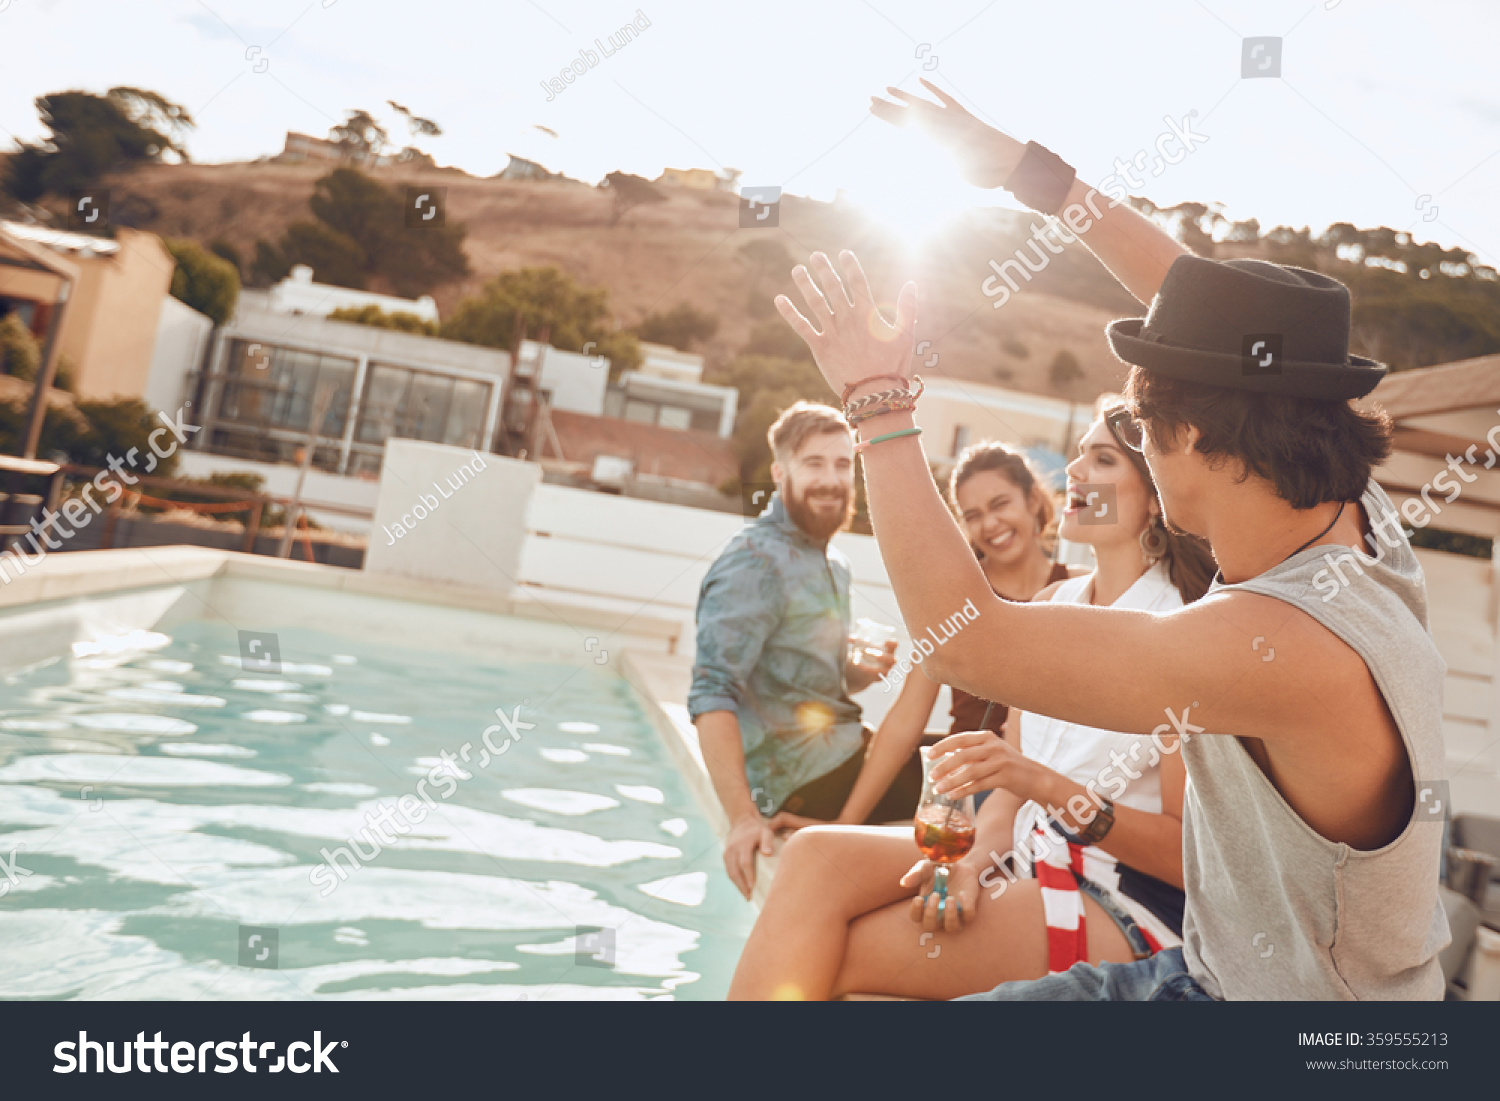 Young people sitting on the edge of the pool enjoying a party. Young woman singing during a the party. Multiracial friends having fun during rooftop party. #359555213